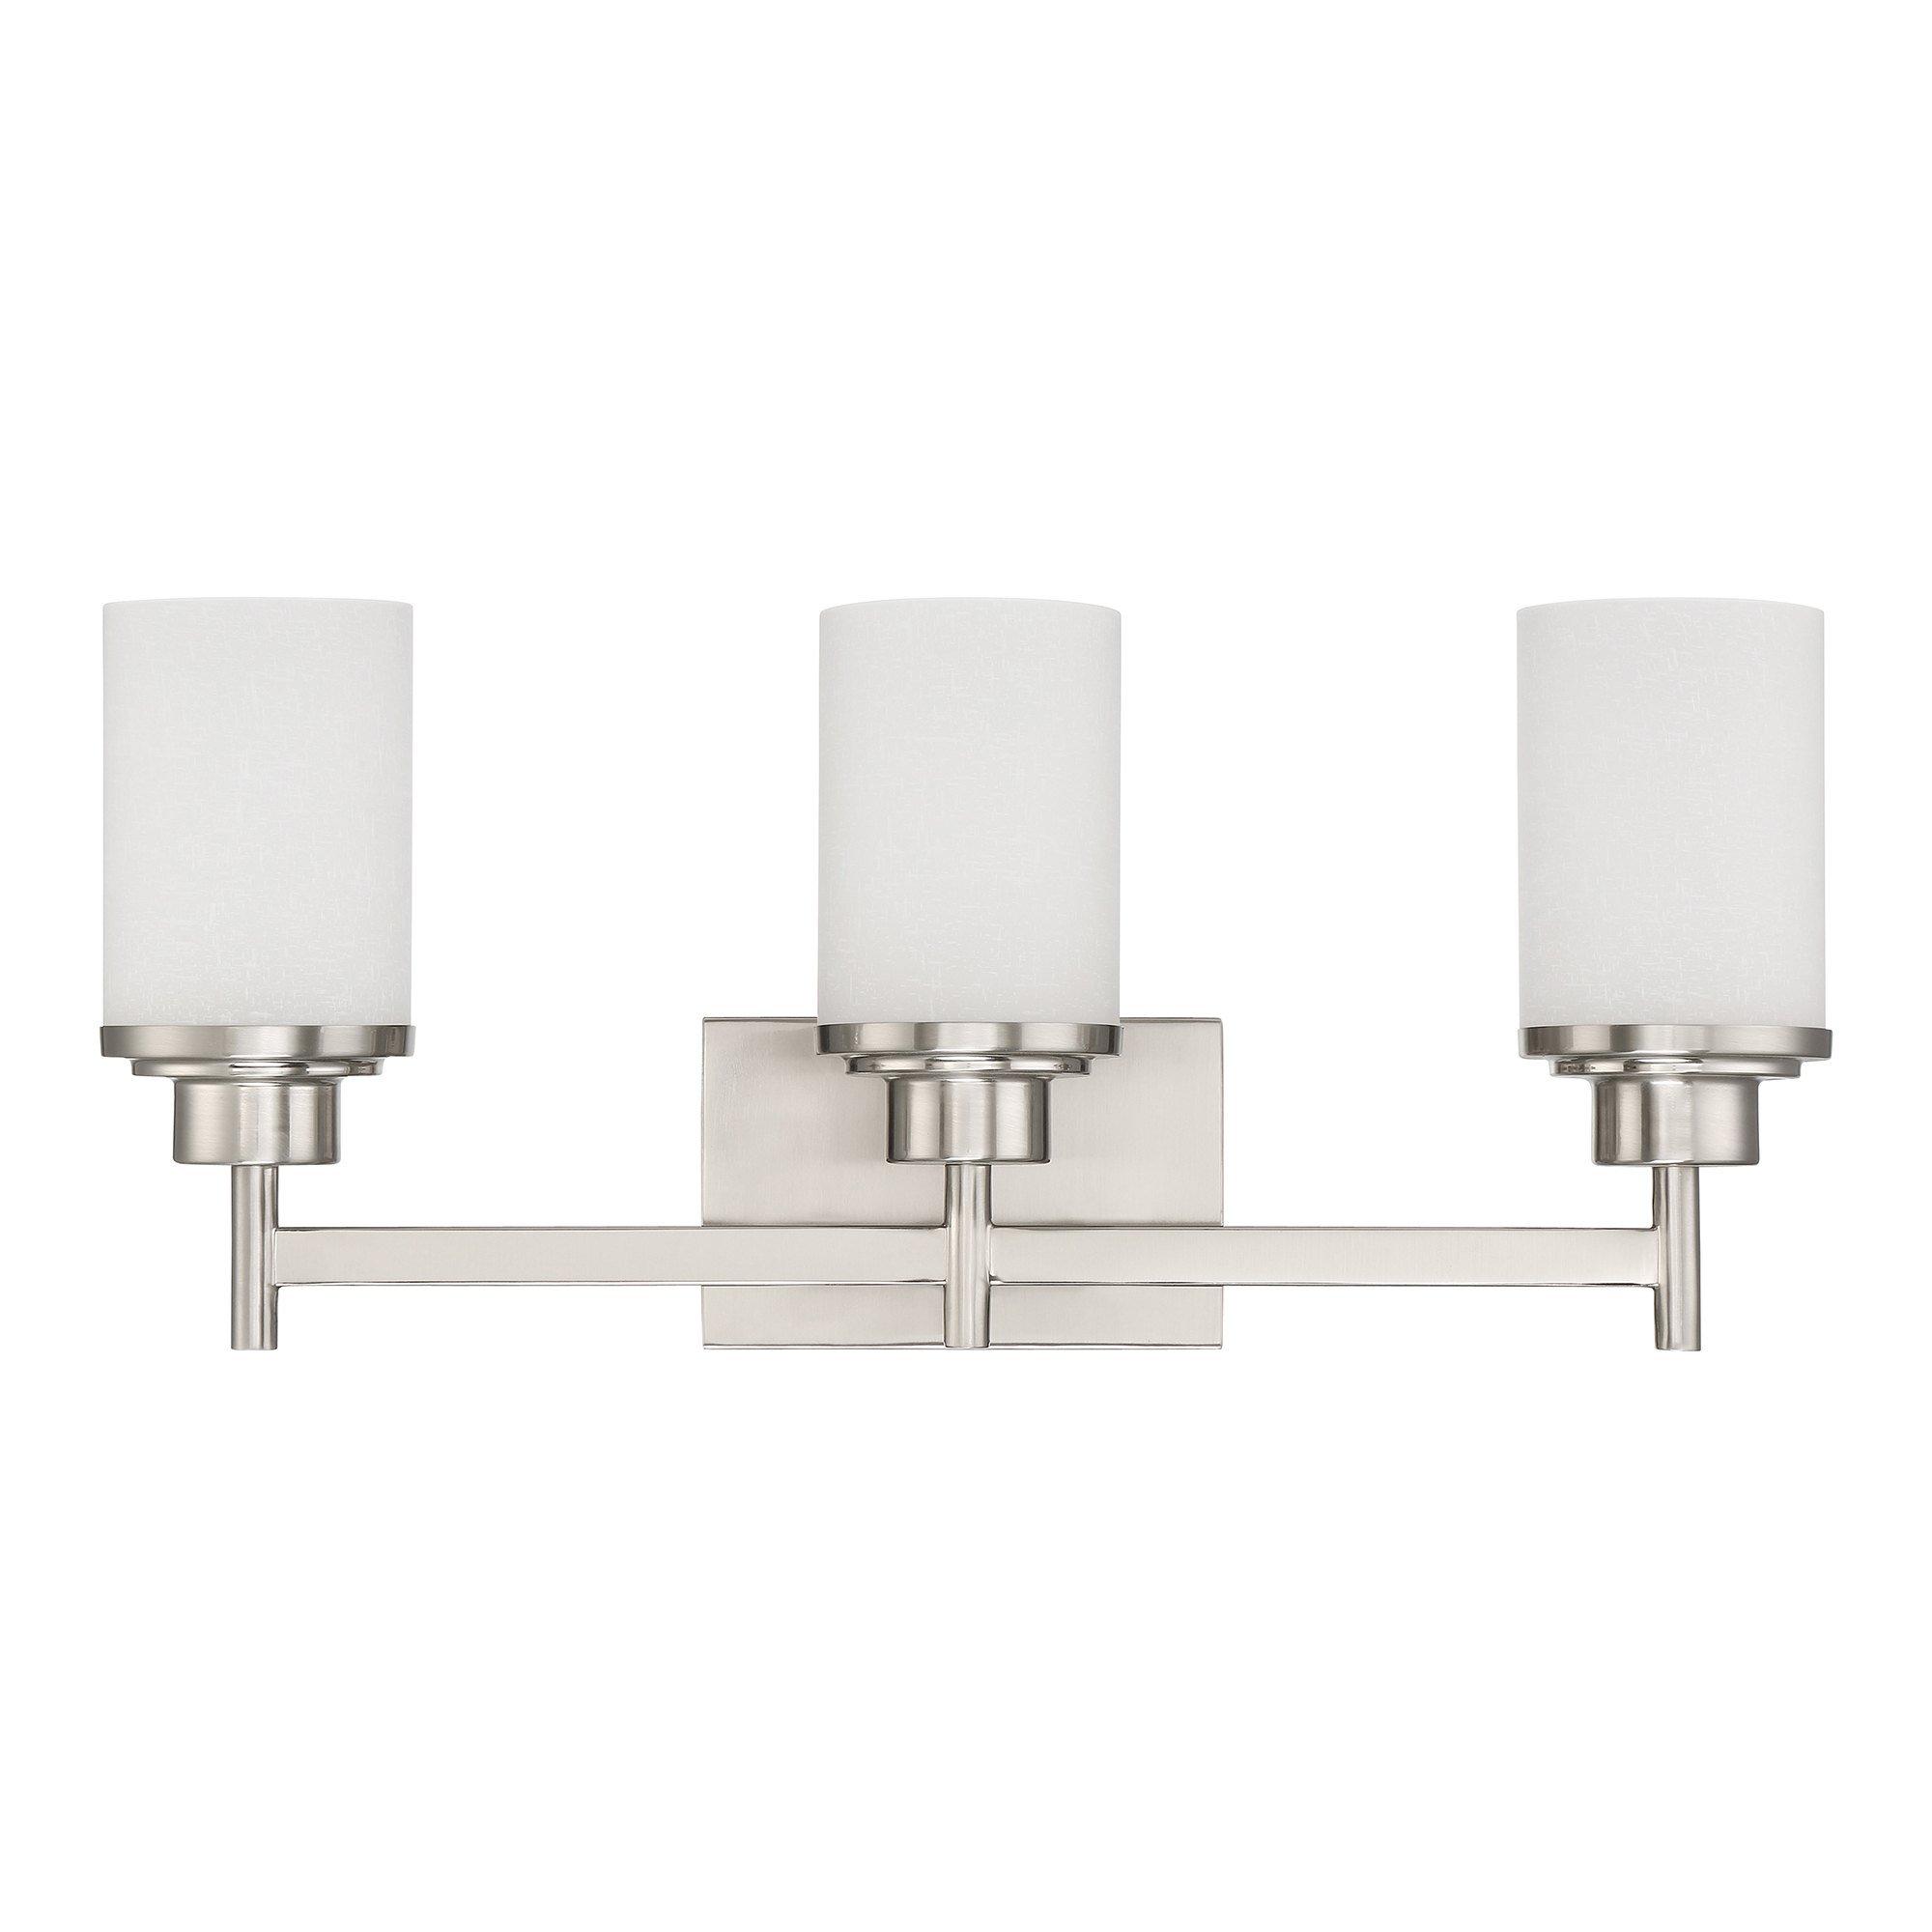 Sunset Lighting Somes Three Light Vanity - Linen Glass, Dimmable - With Bright Satin Nickel Finish